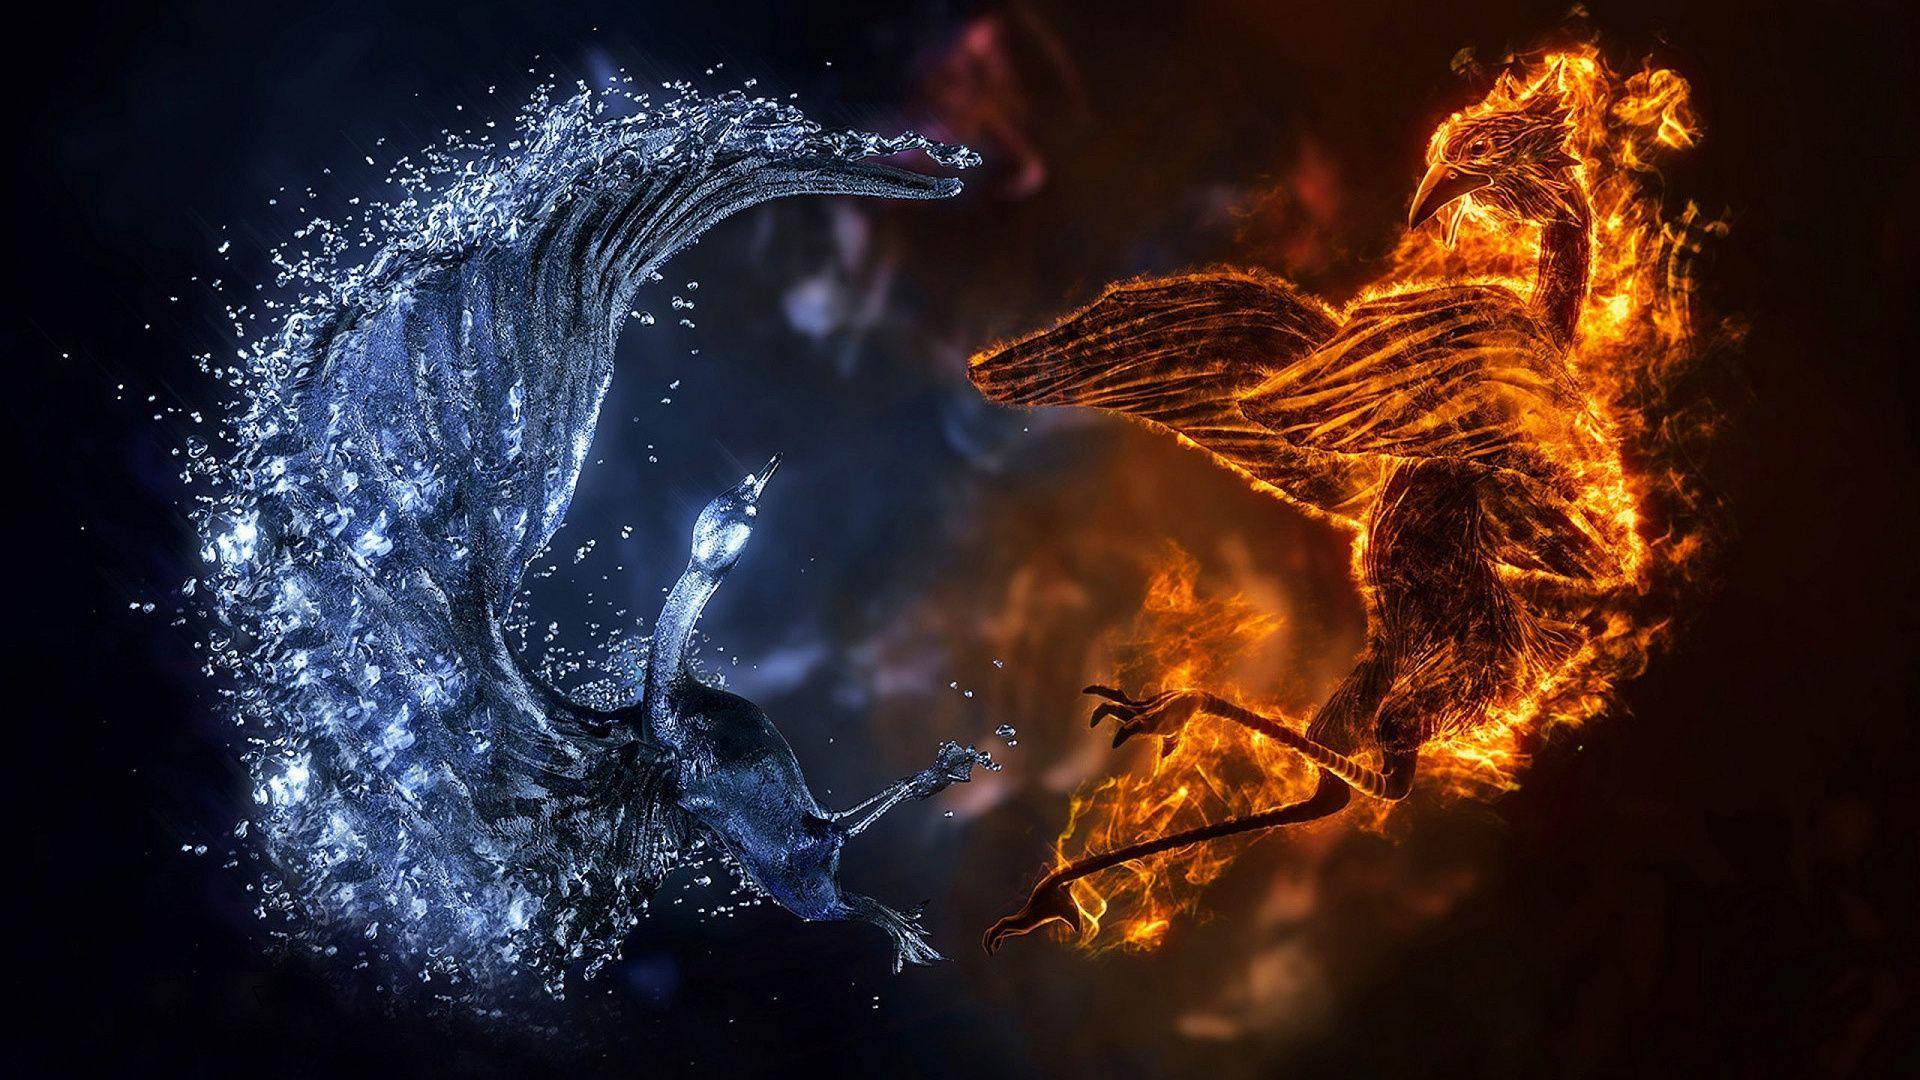 Fire Ice Birds Wallpaper in 1920x1080. Gods and Monsters